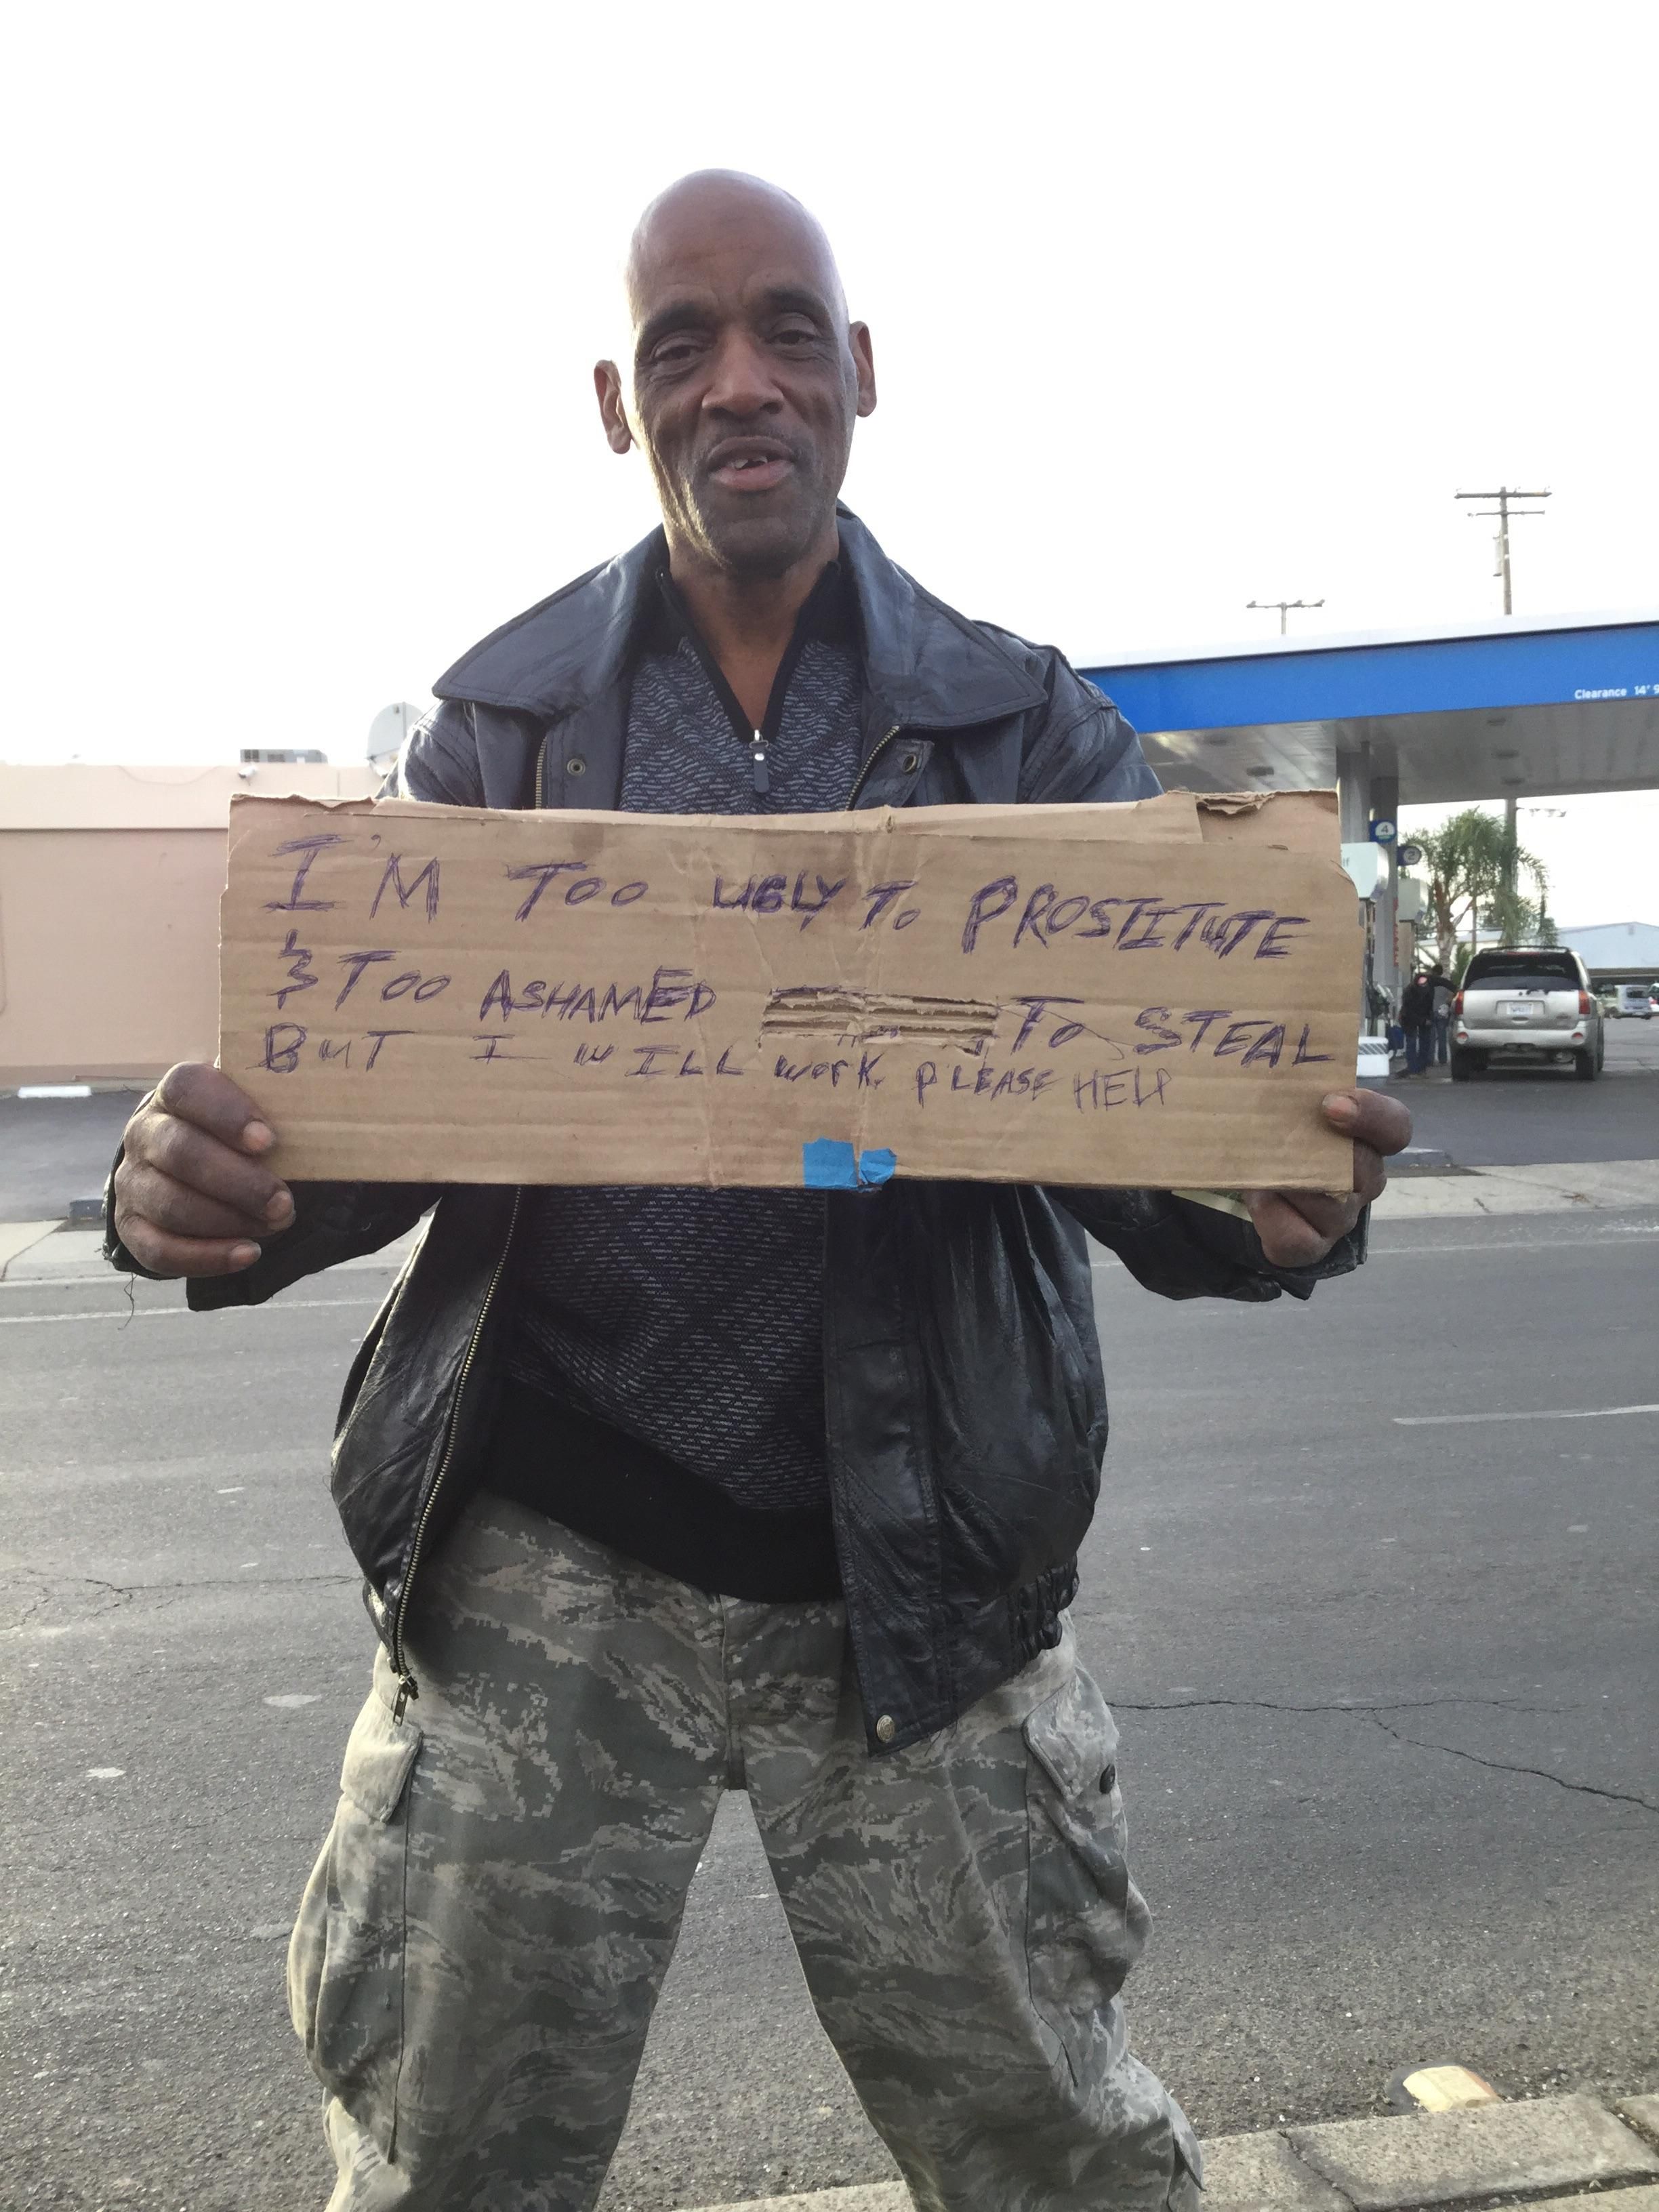 This homeless man's sign